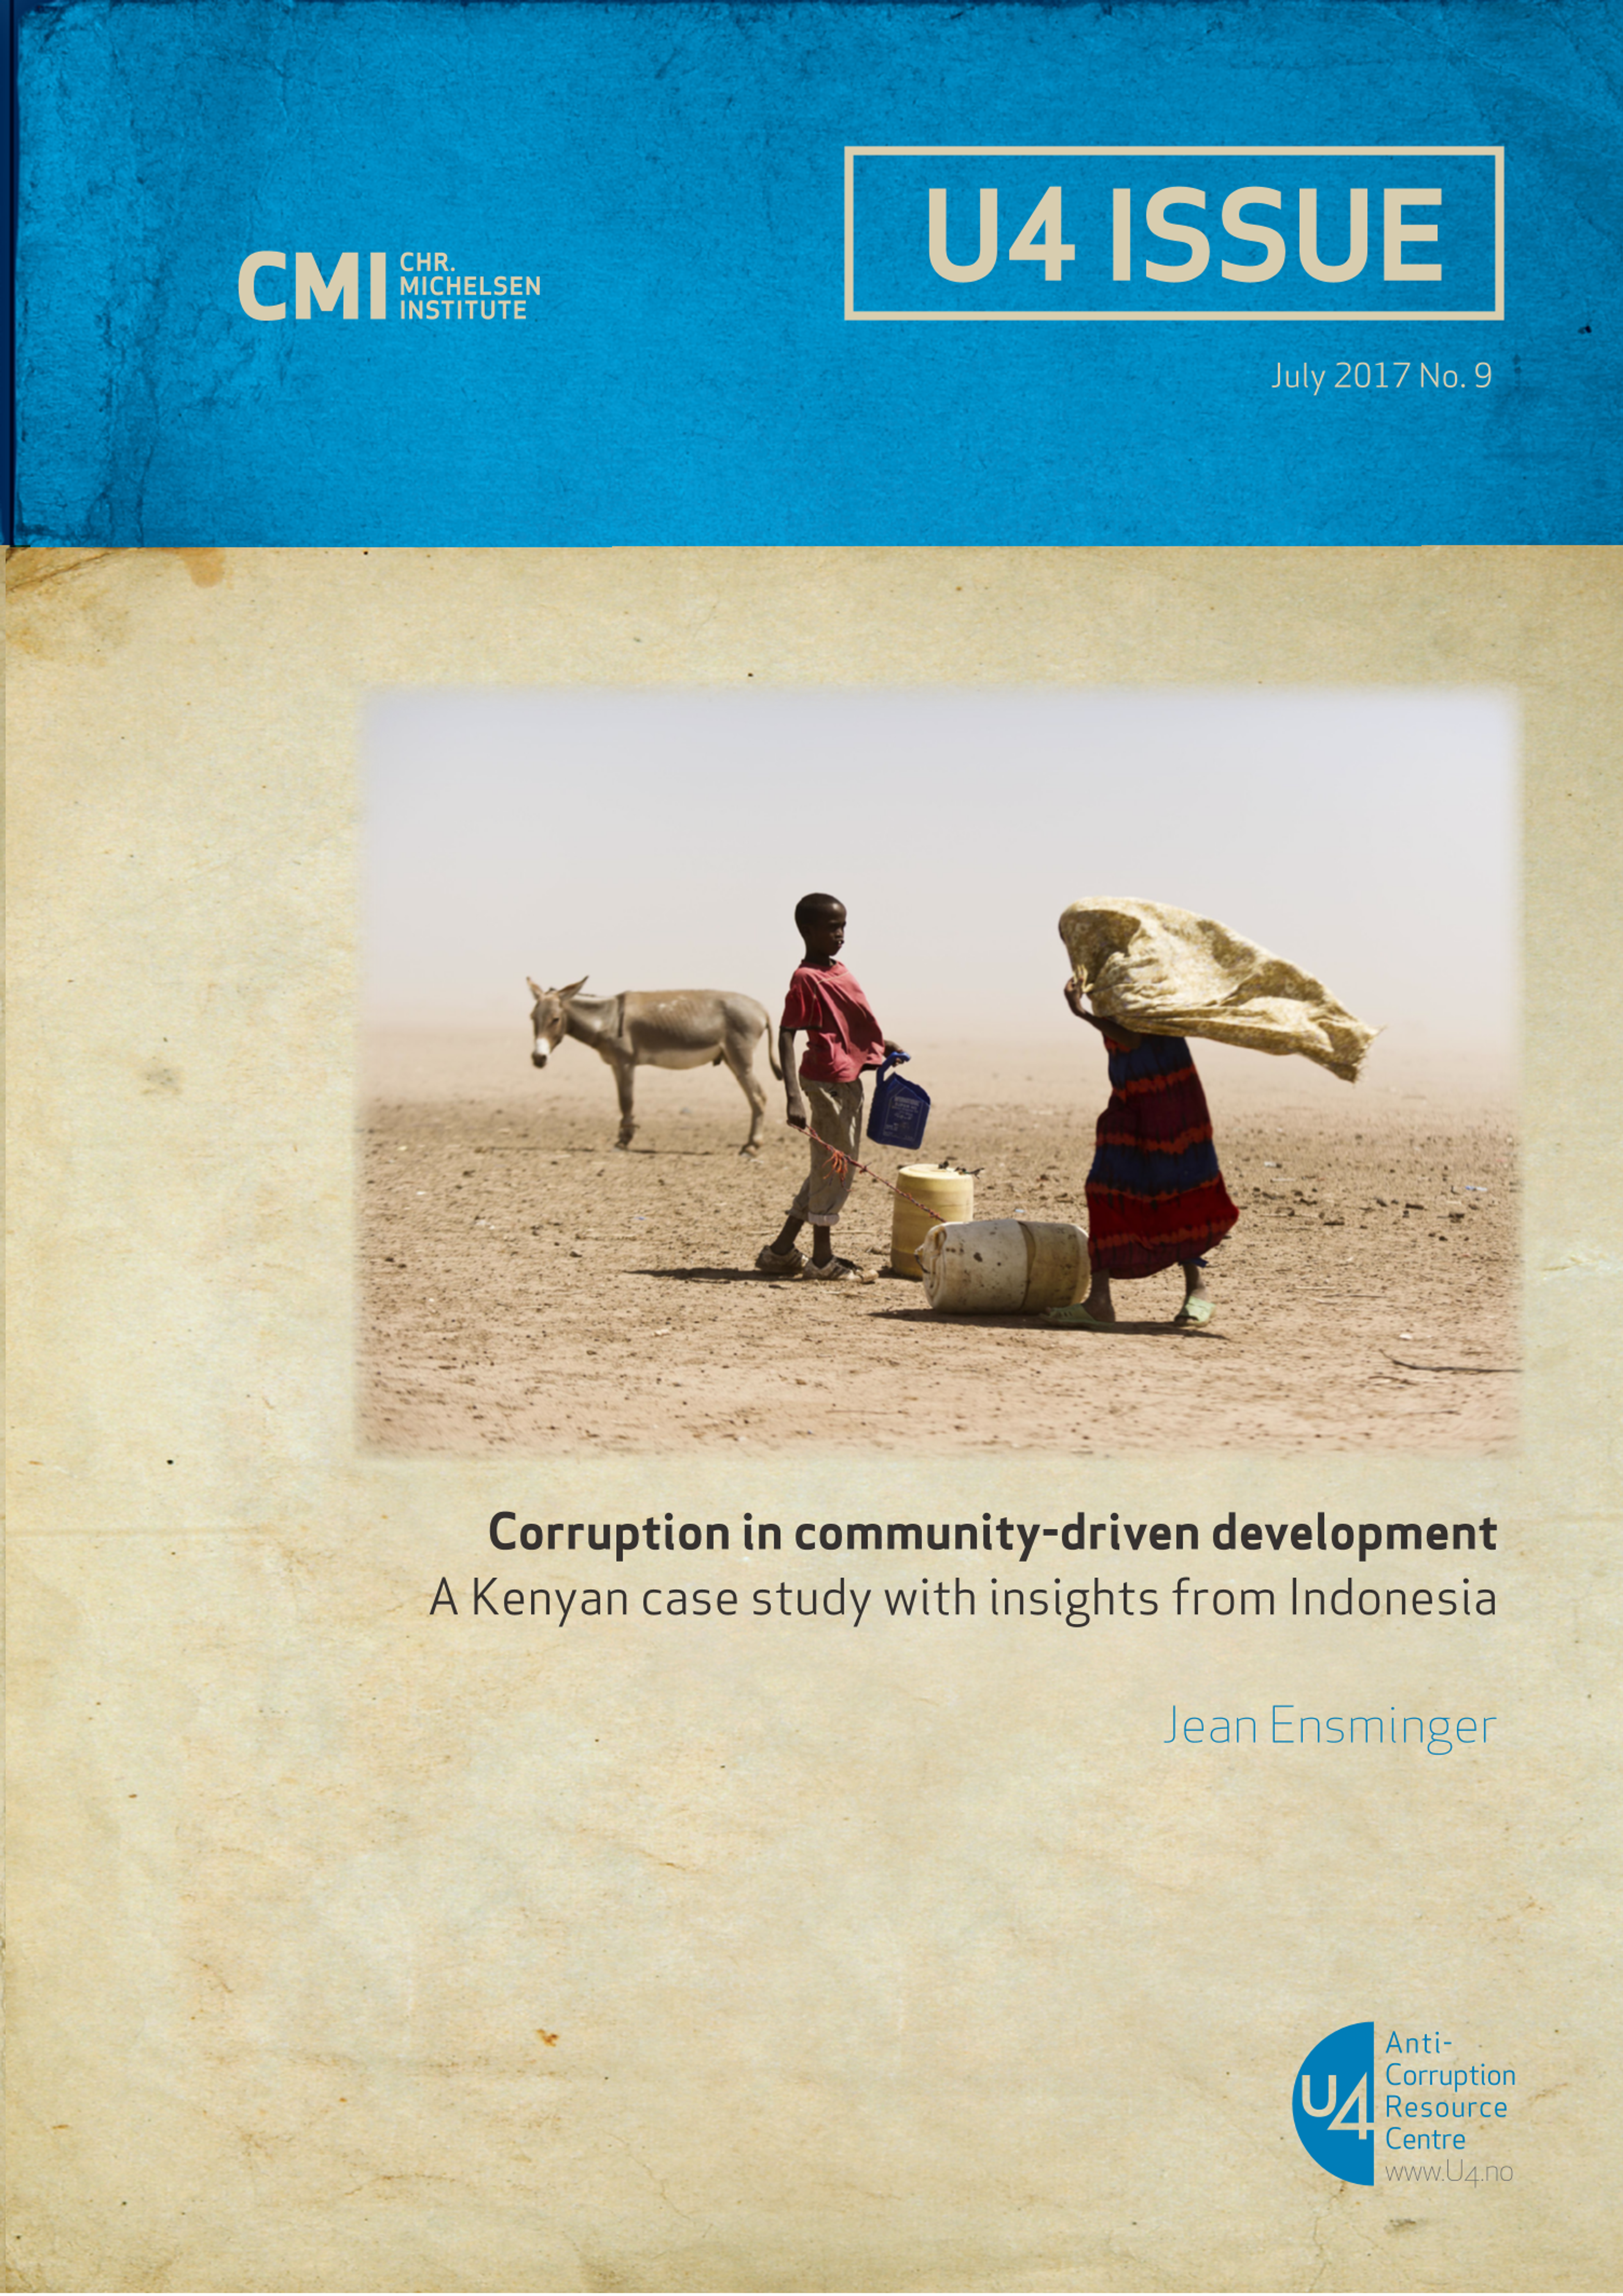 Corruption in community-driven development. A Kenyan case study with insights from Indonesia